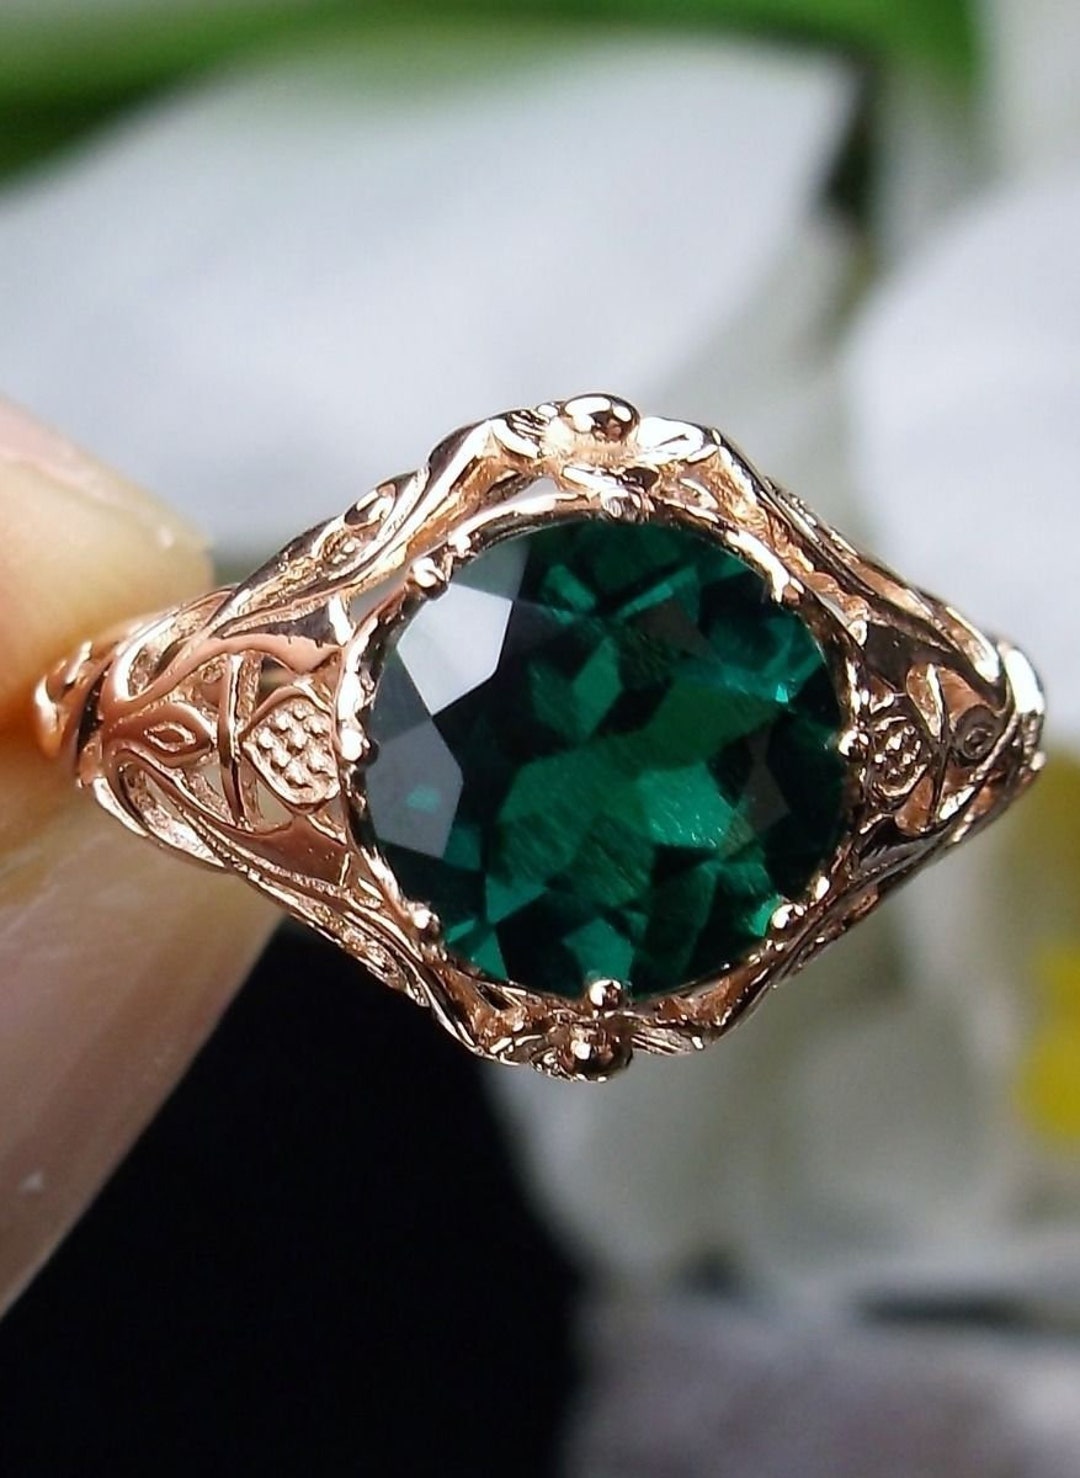 Natural Emerald Ring 10k Rose Gold/ Treated Green Emerald - Etsy